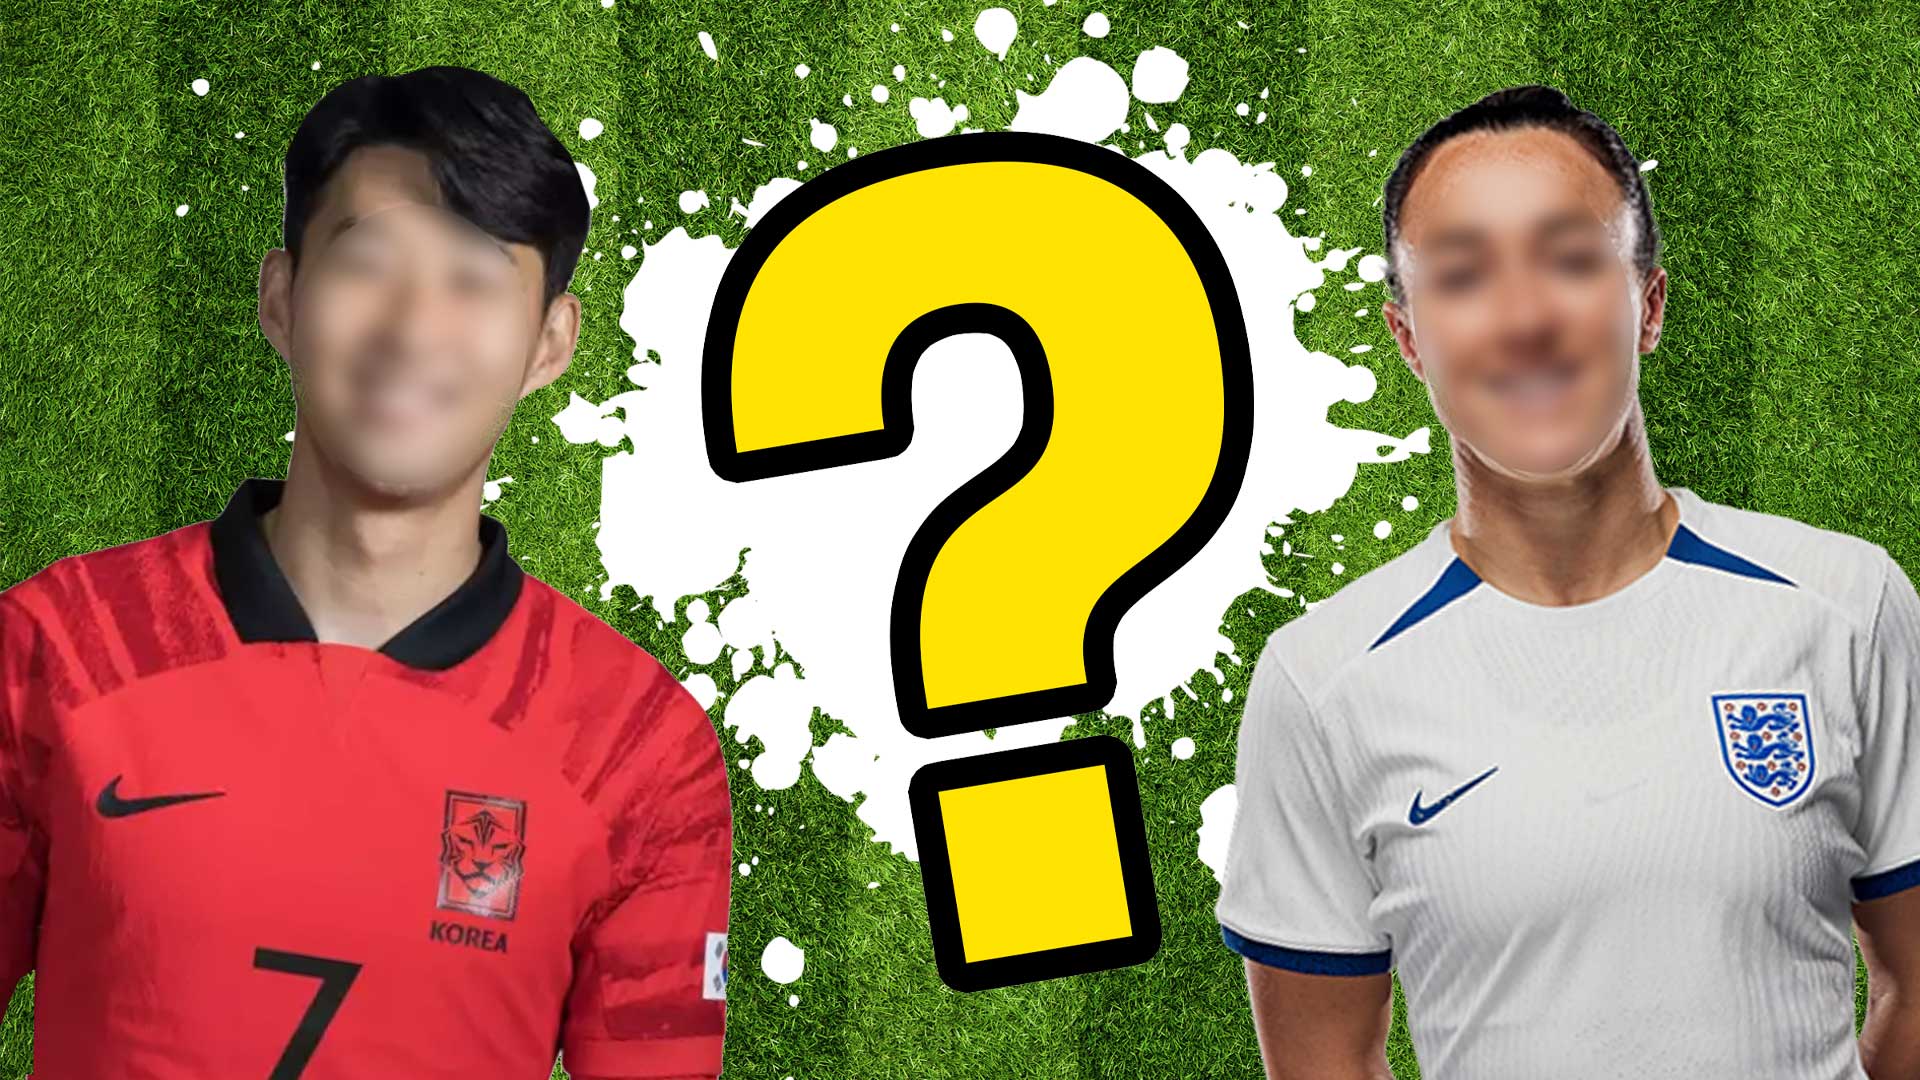 All Football - 🎰FUN GAME: Guess the footballers from the